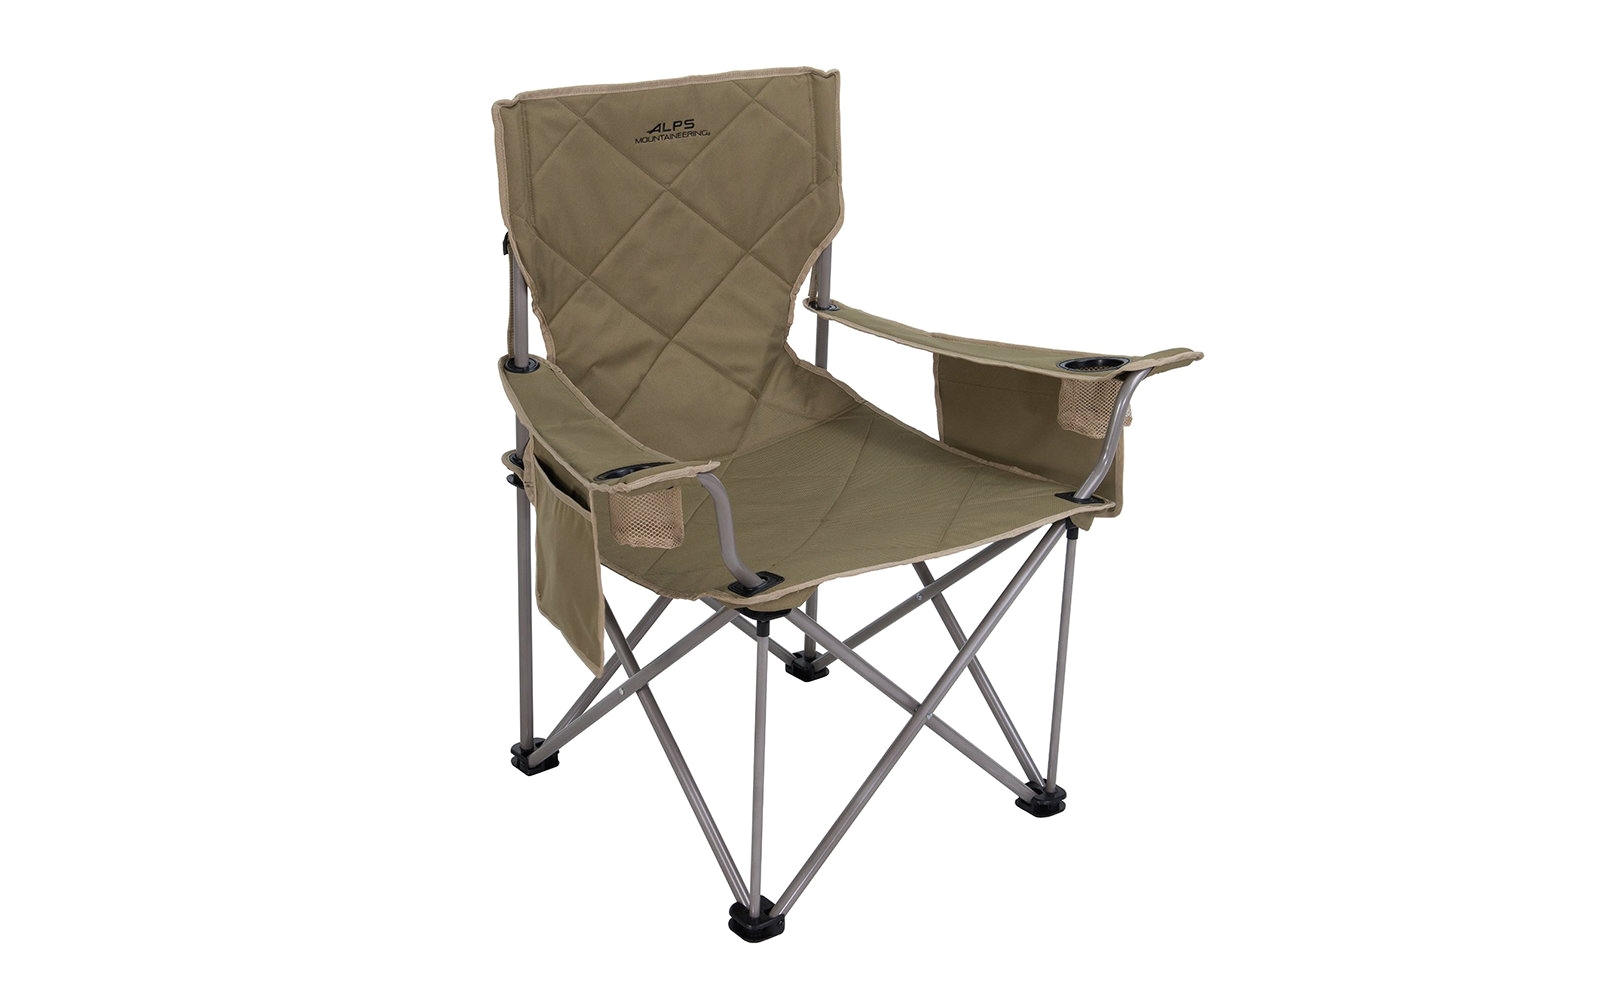 Wide Heavy Duty Beach Chairs the Best Folding Camping Chairs Travel Leisure